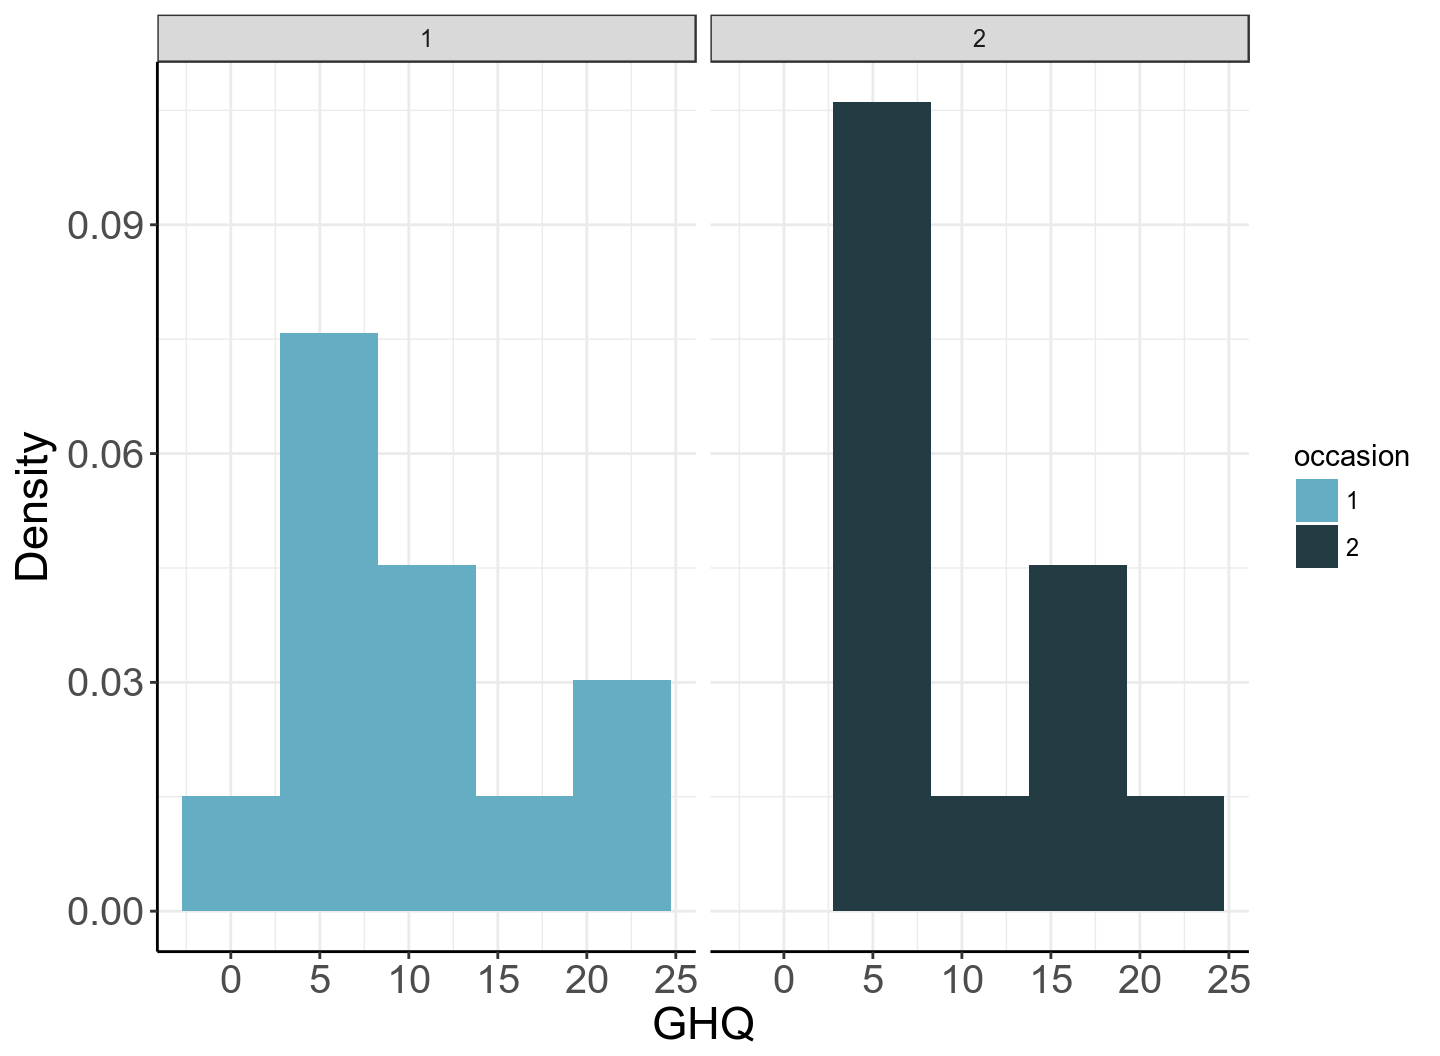 Histogram of GHQ by occasion